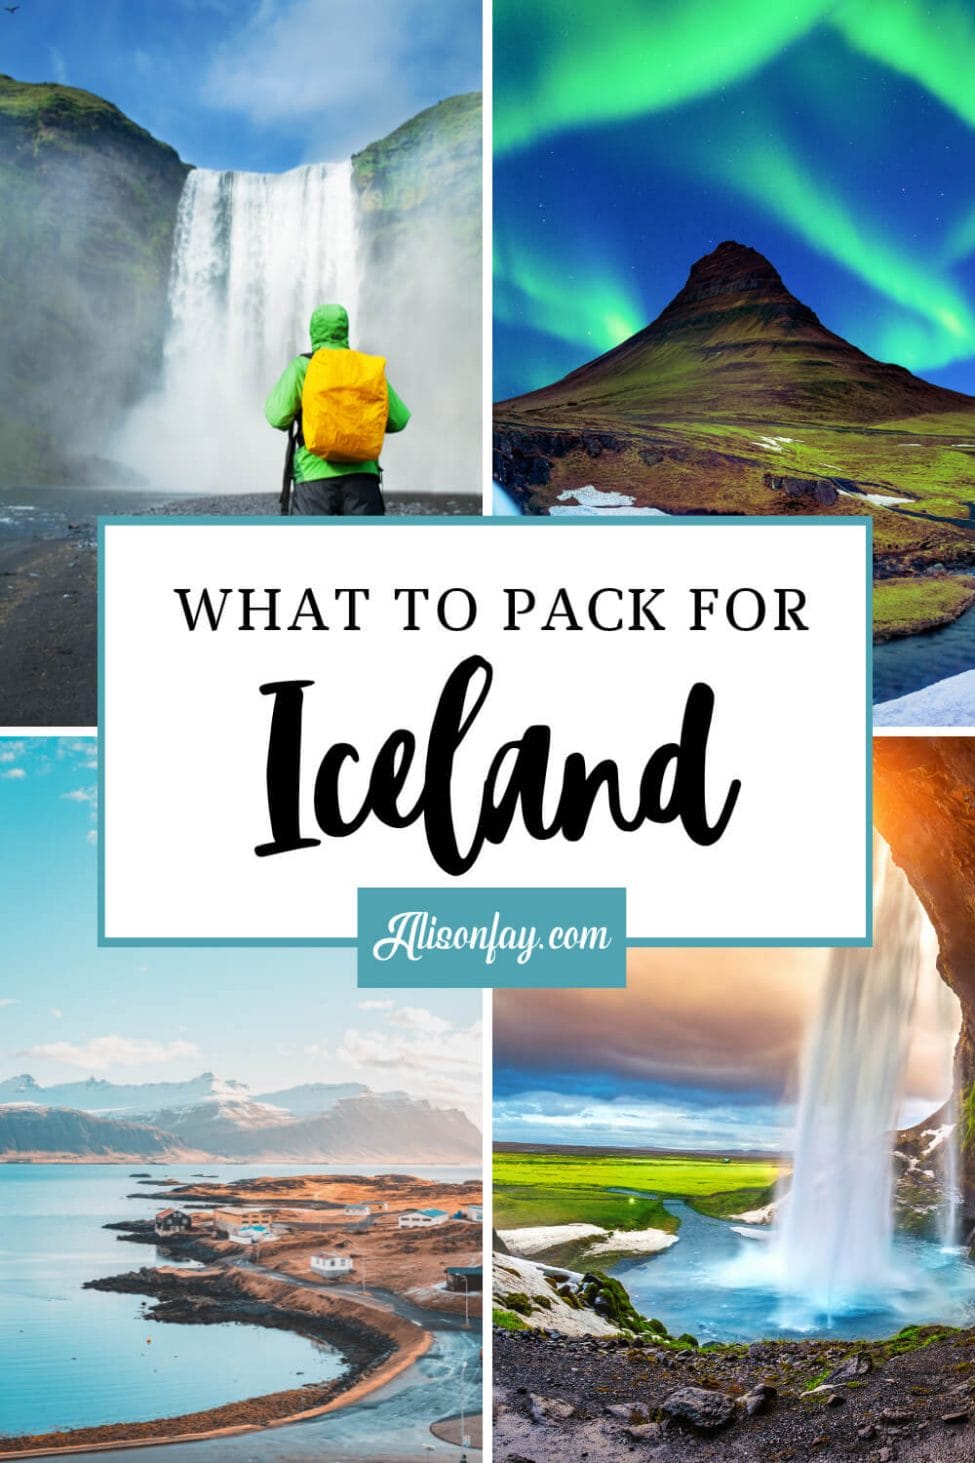 What to pack for Iceland